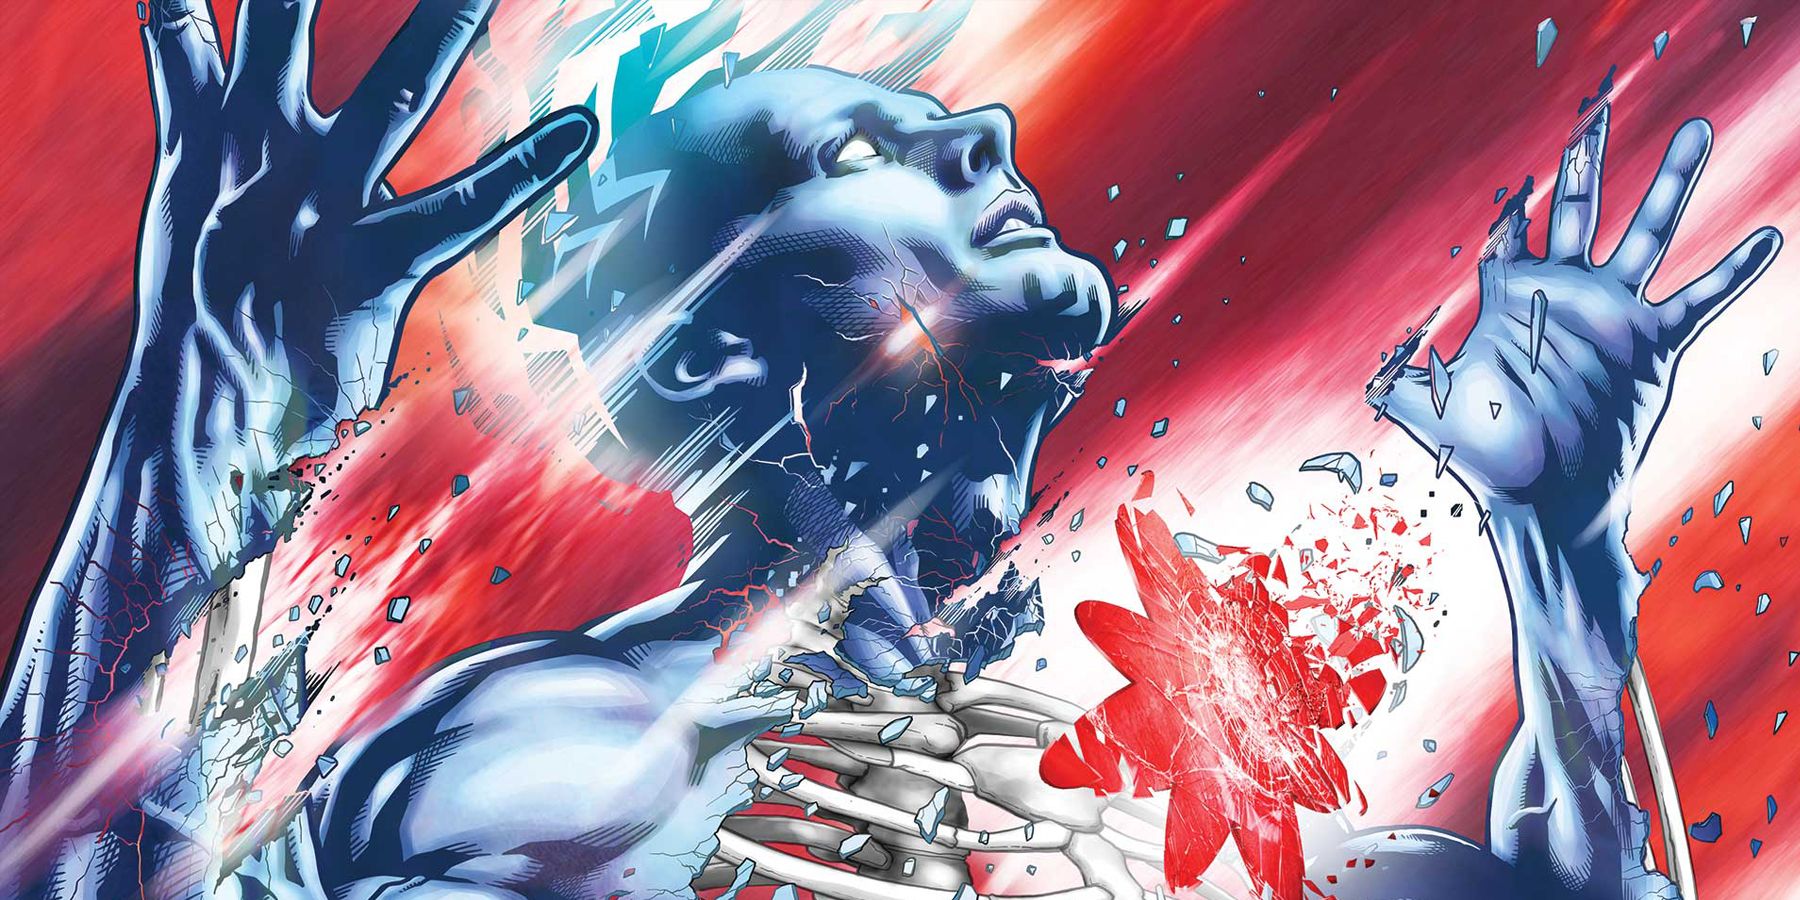 Captain Atom being ripped apart by energy